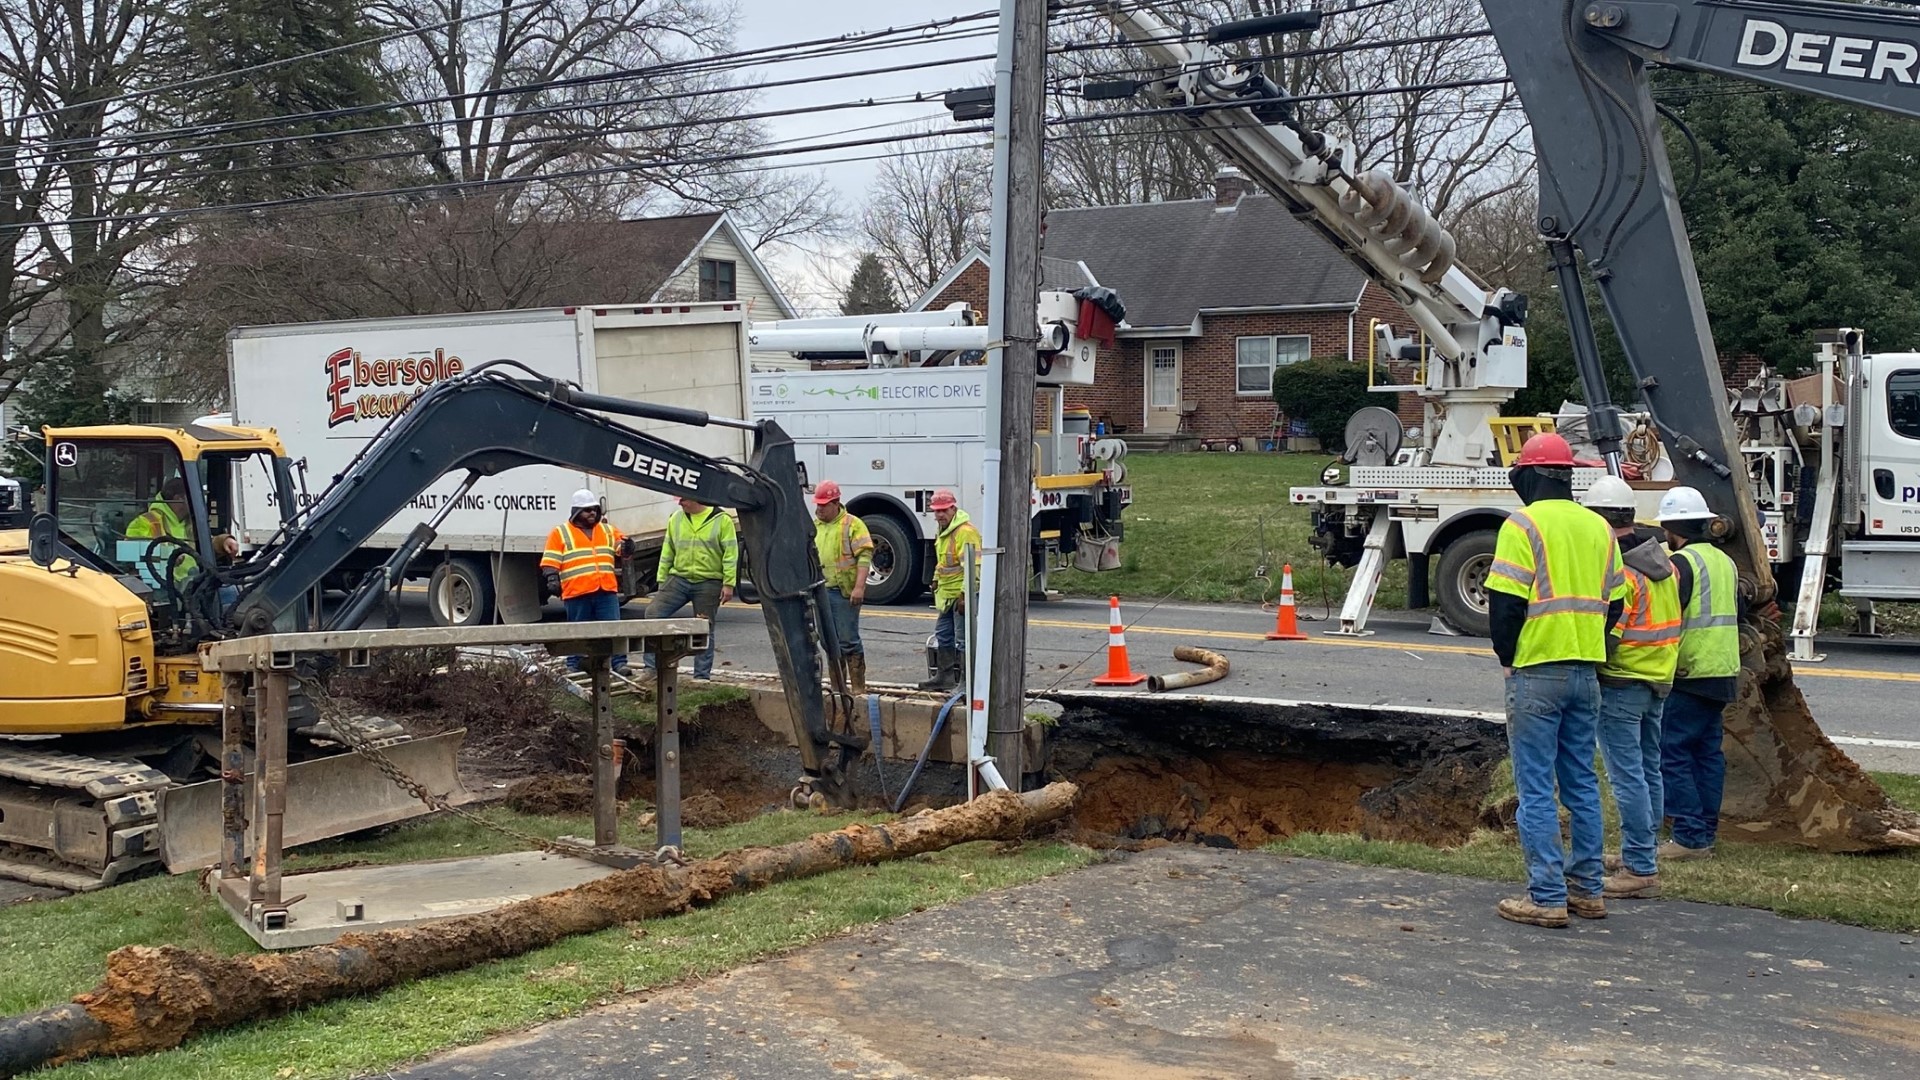 Authorities say the sinkhole impacted gas and power utilities along Fishburn Road, forcing crews to close the street to make repairs.